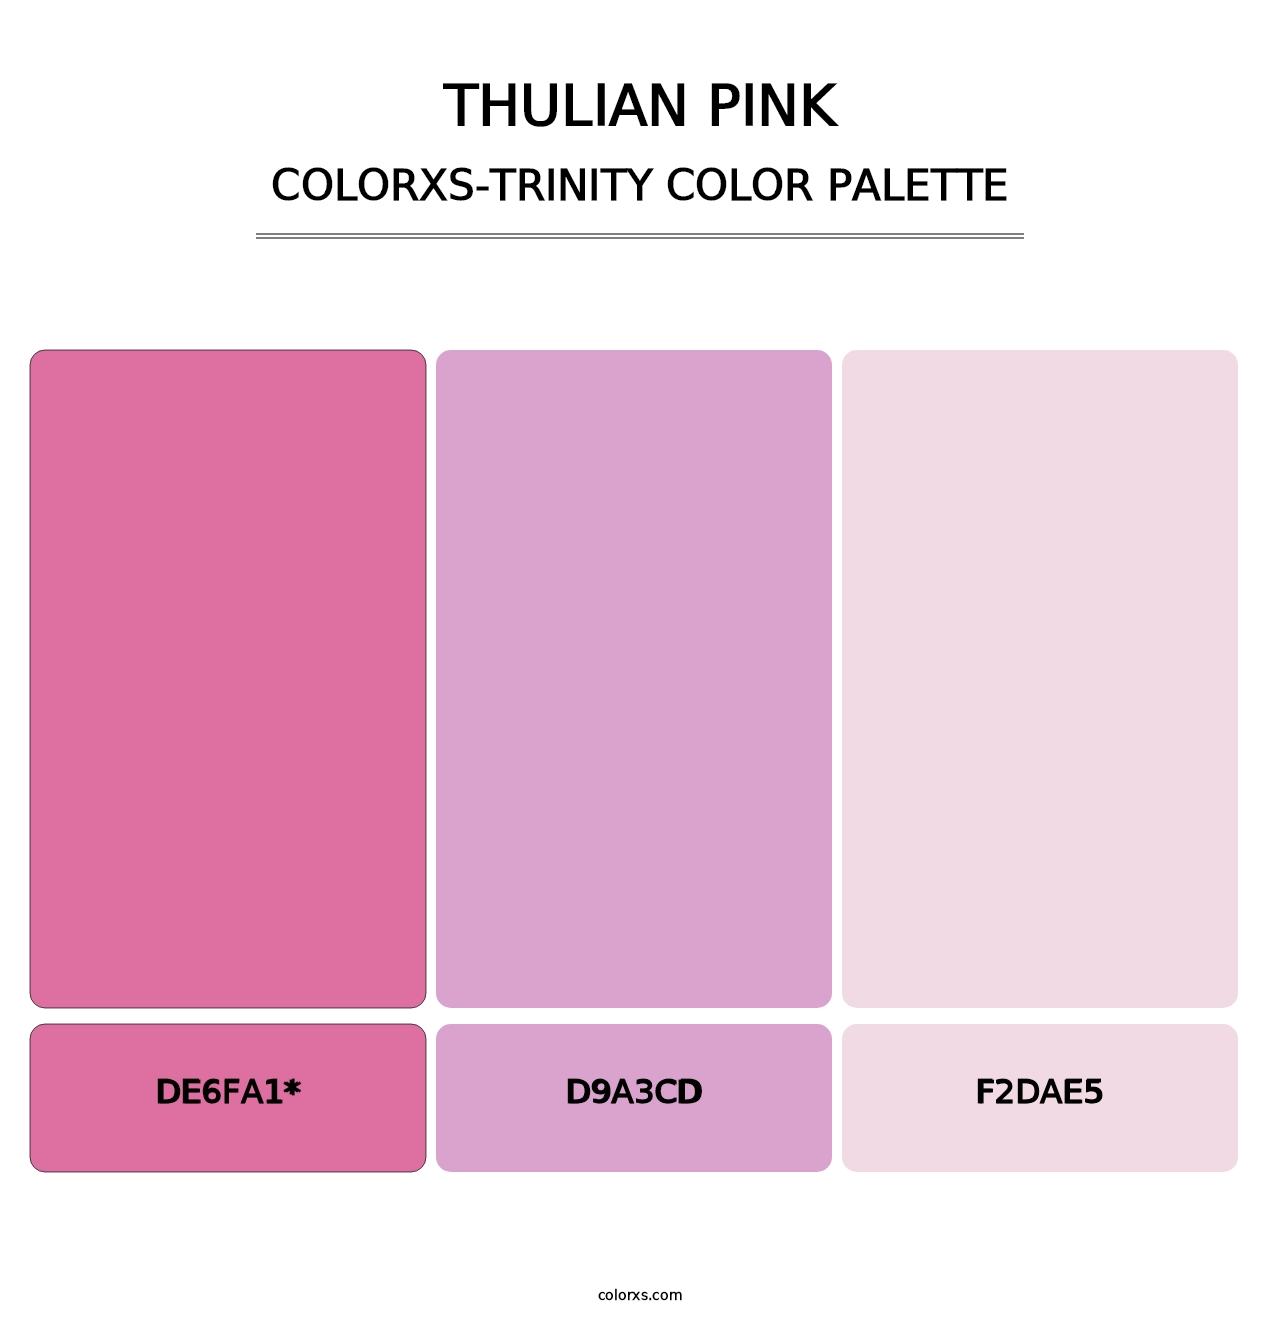 Thulian Pink - Colorxs Trinity Palette